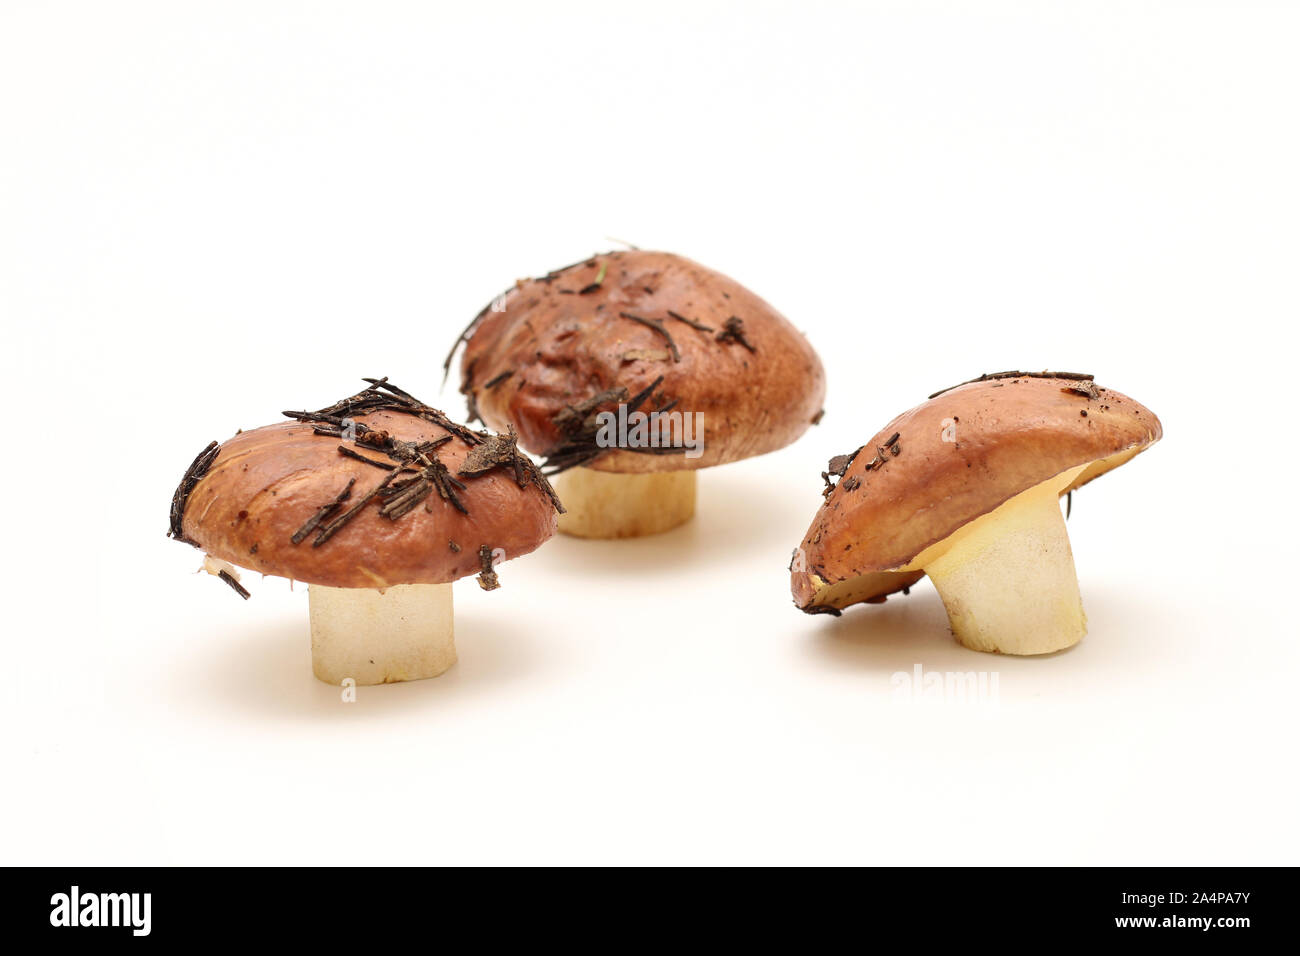 Three dirty, unpeeled standing on tube Suillus mushrooms isolated on a white background. Selective focus. Stock Photo